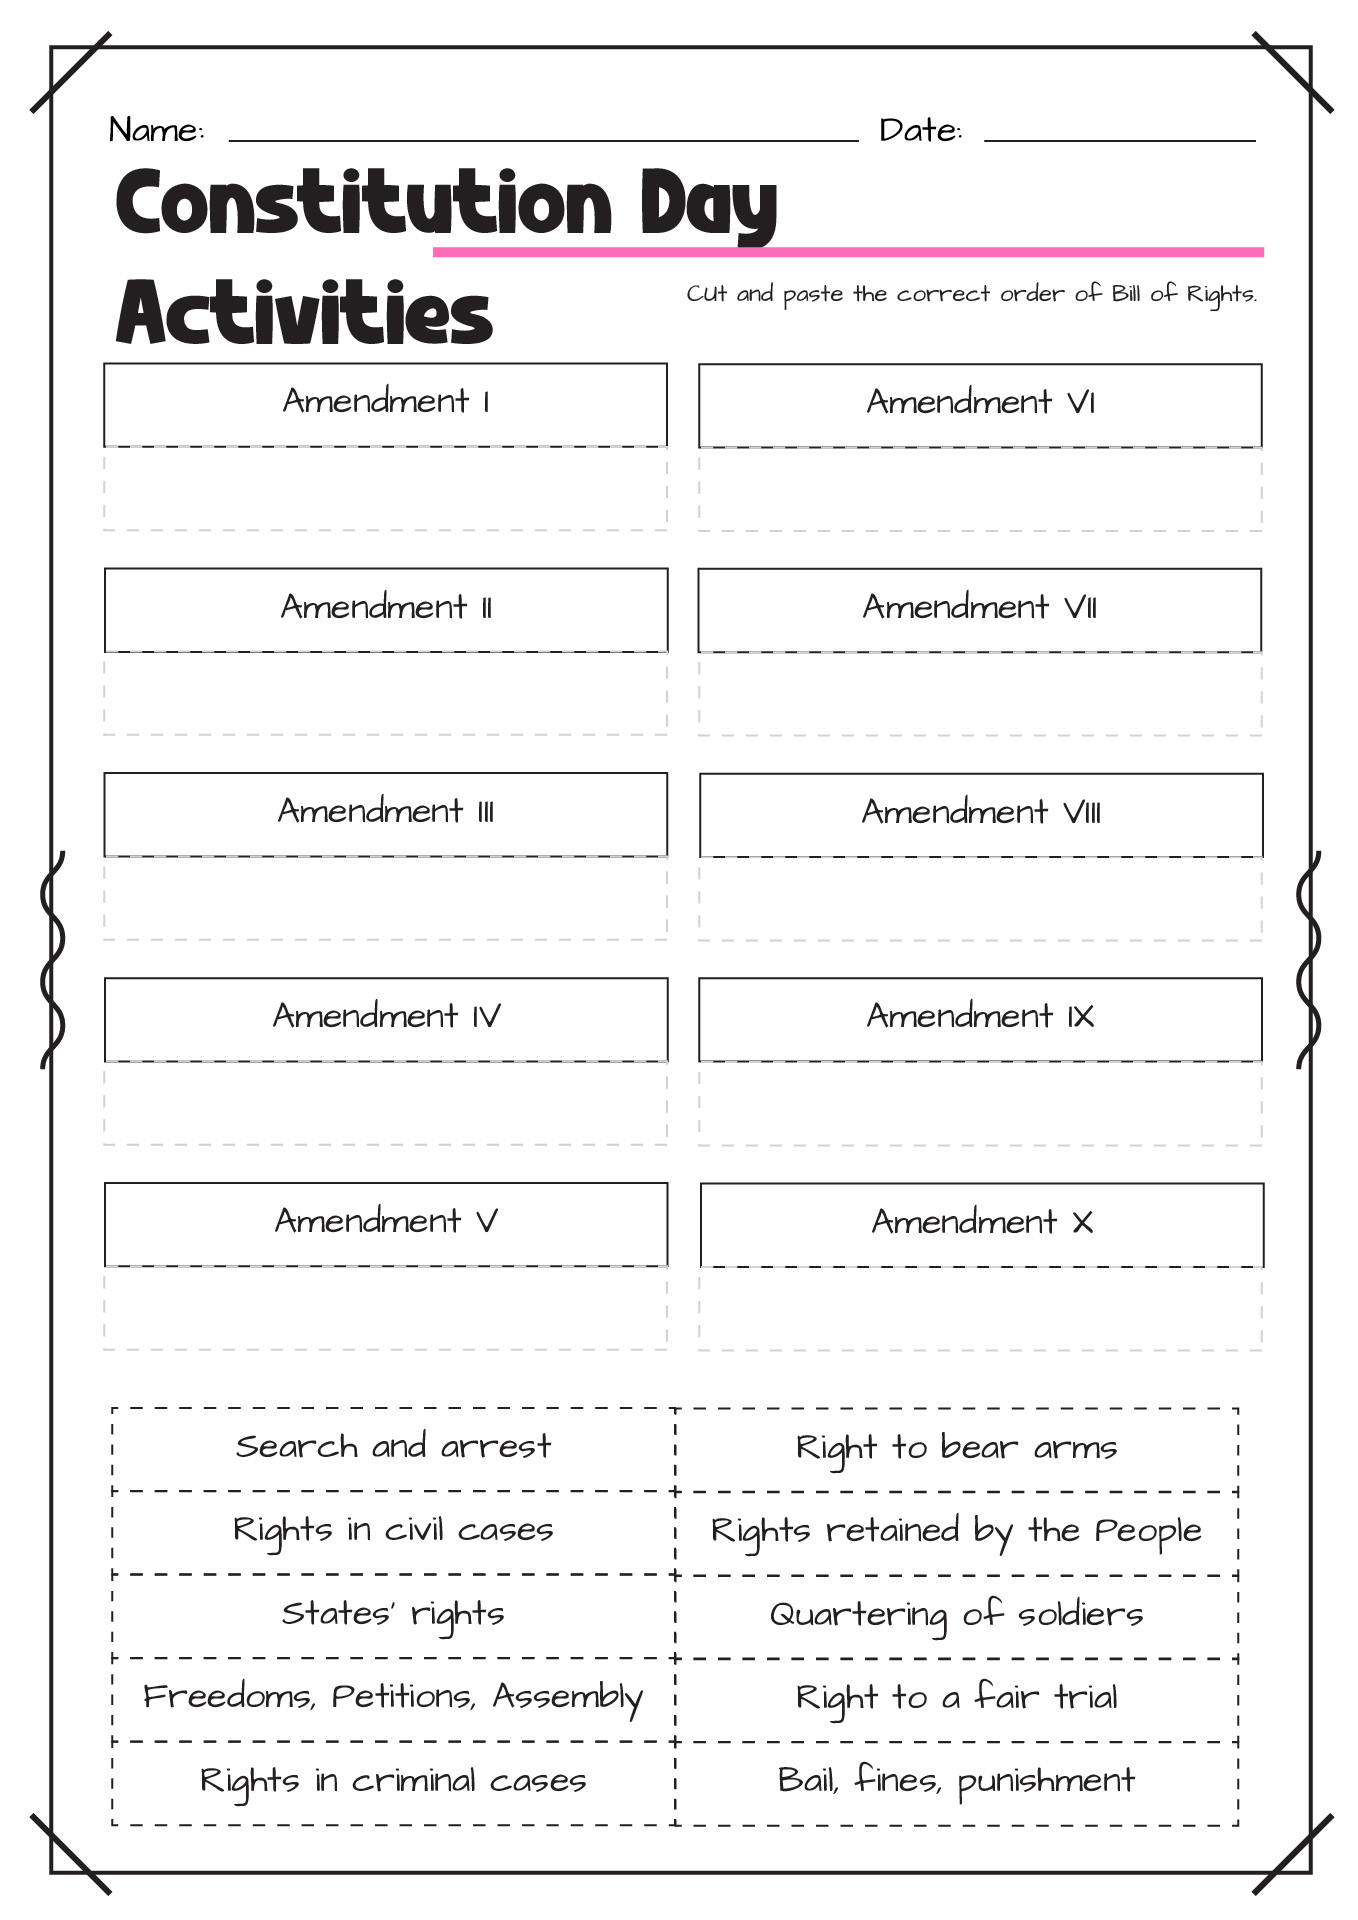 12-best-images-of-constitution-worksheets-for-5th-grade-constitution